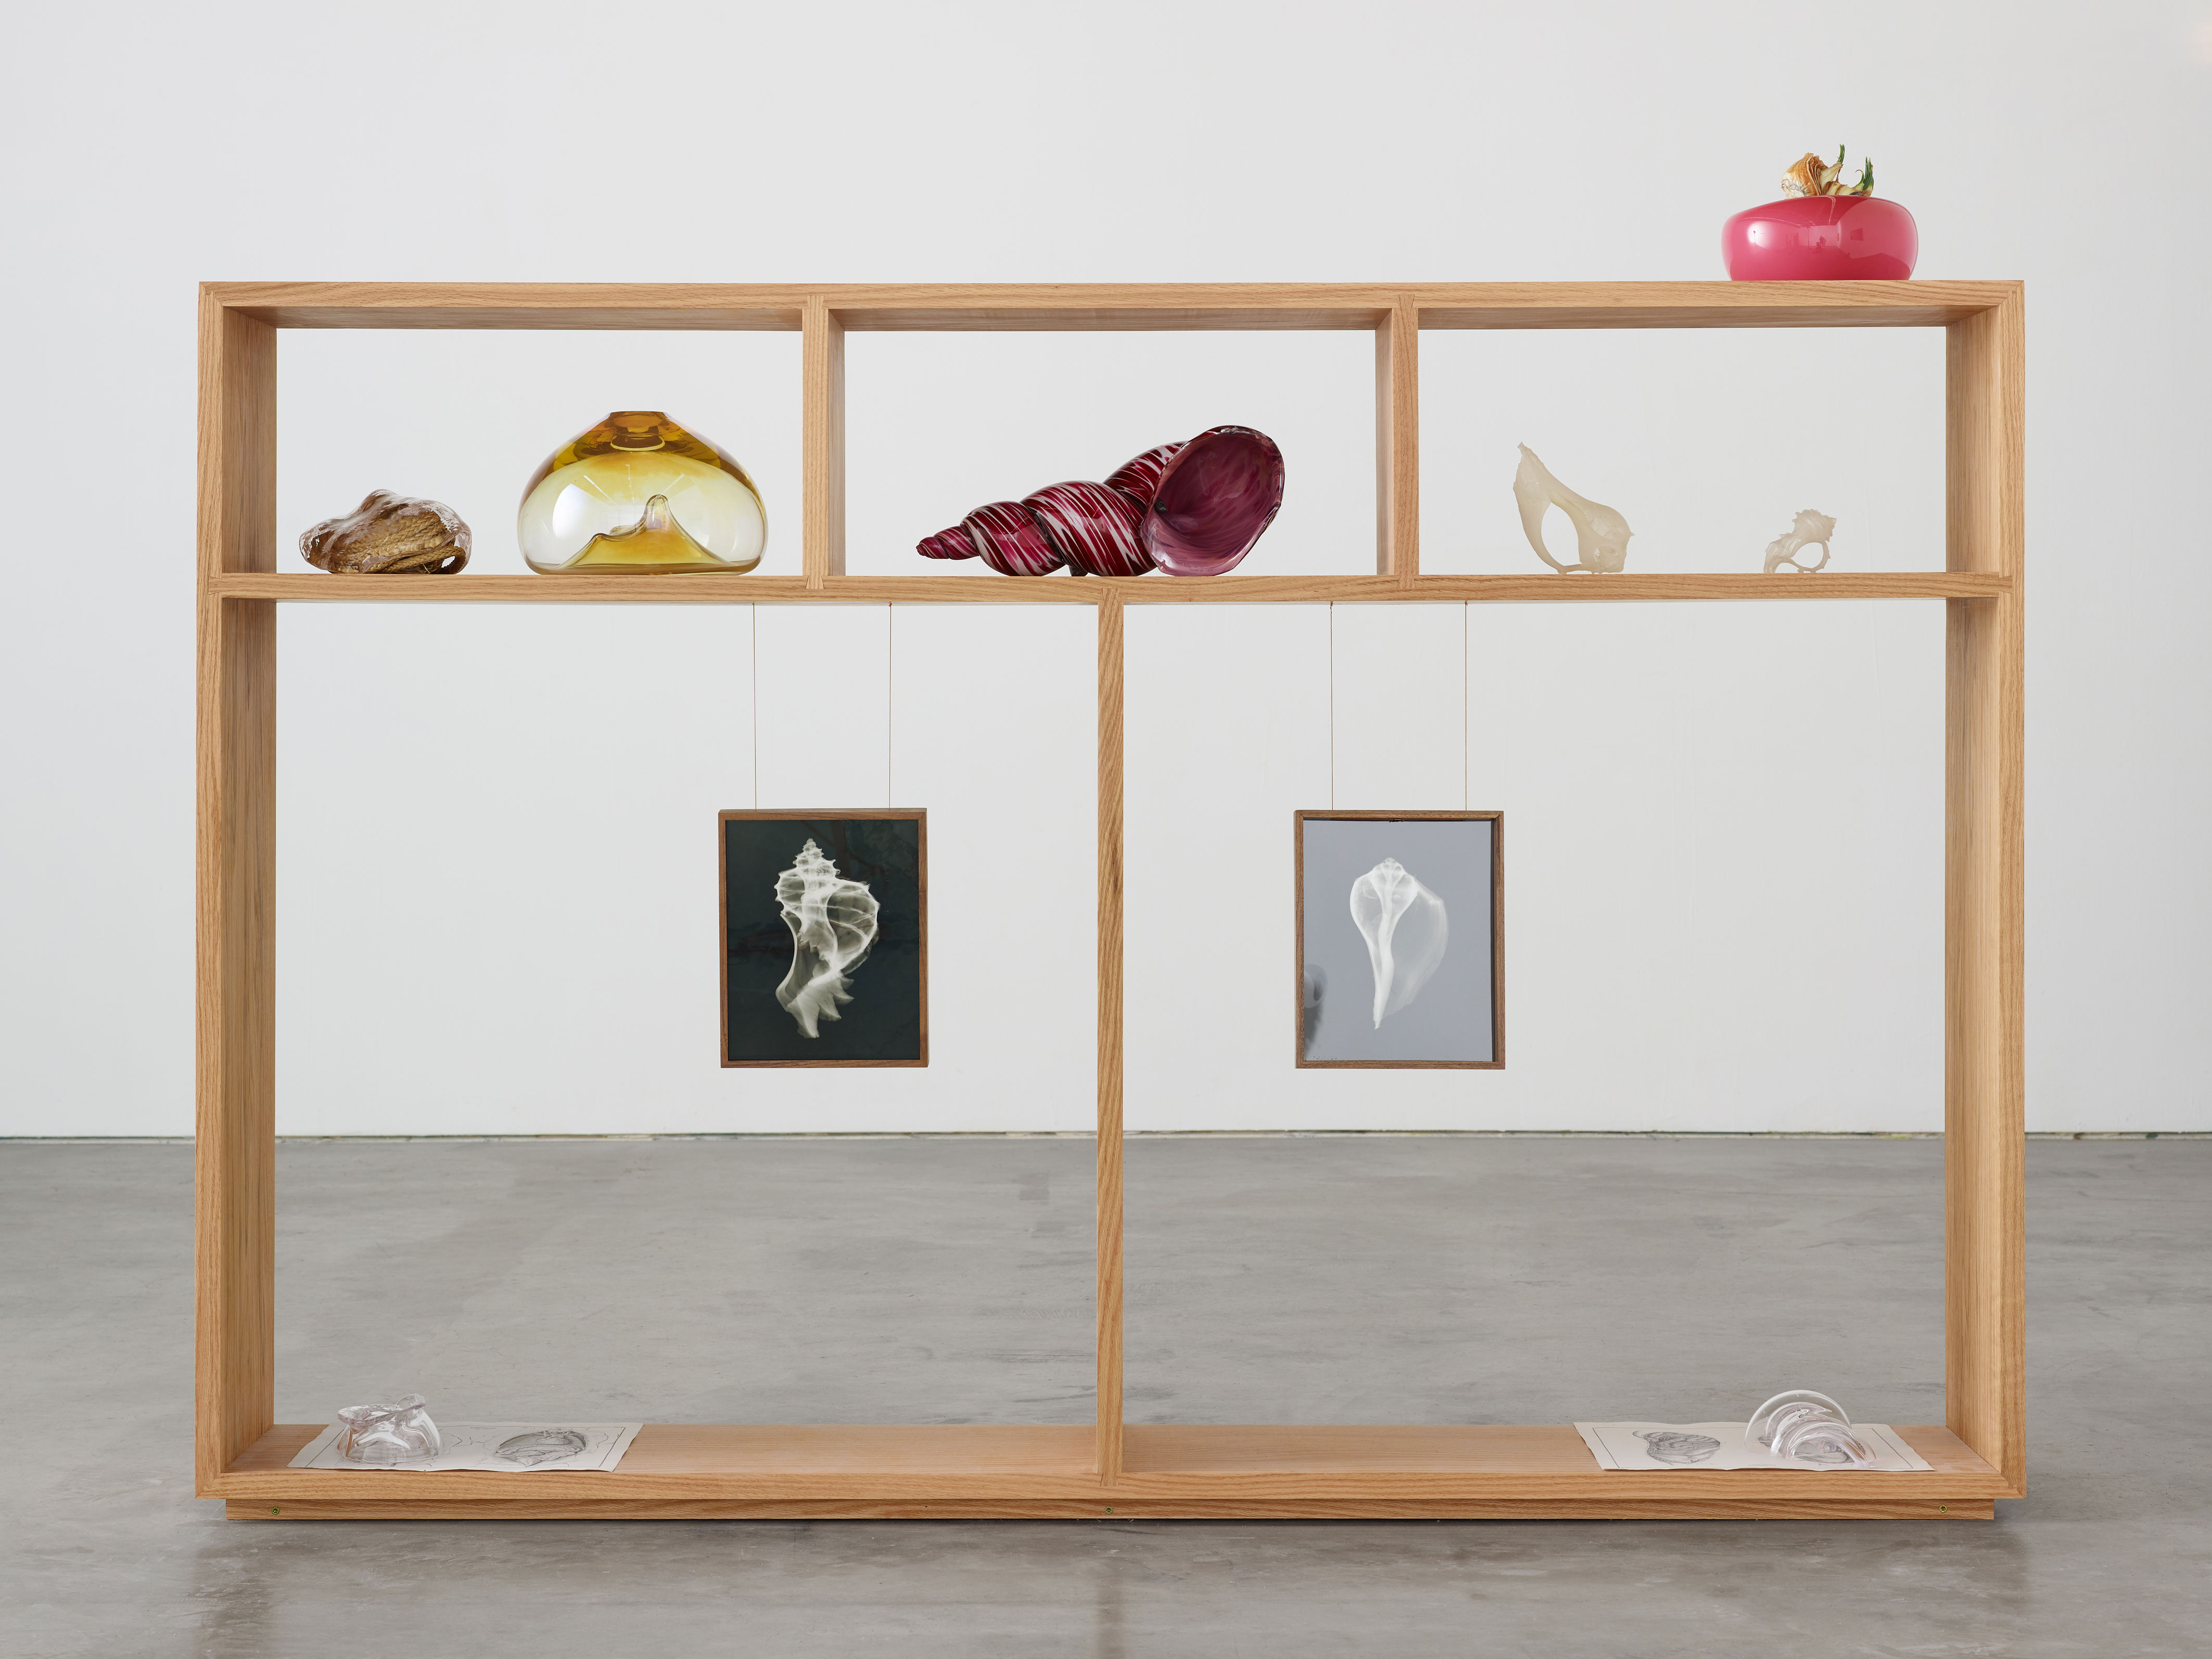 Wood shelving unit holding various objects and artworks created by artist Kelly Akashi